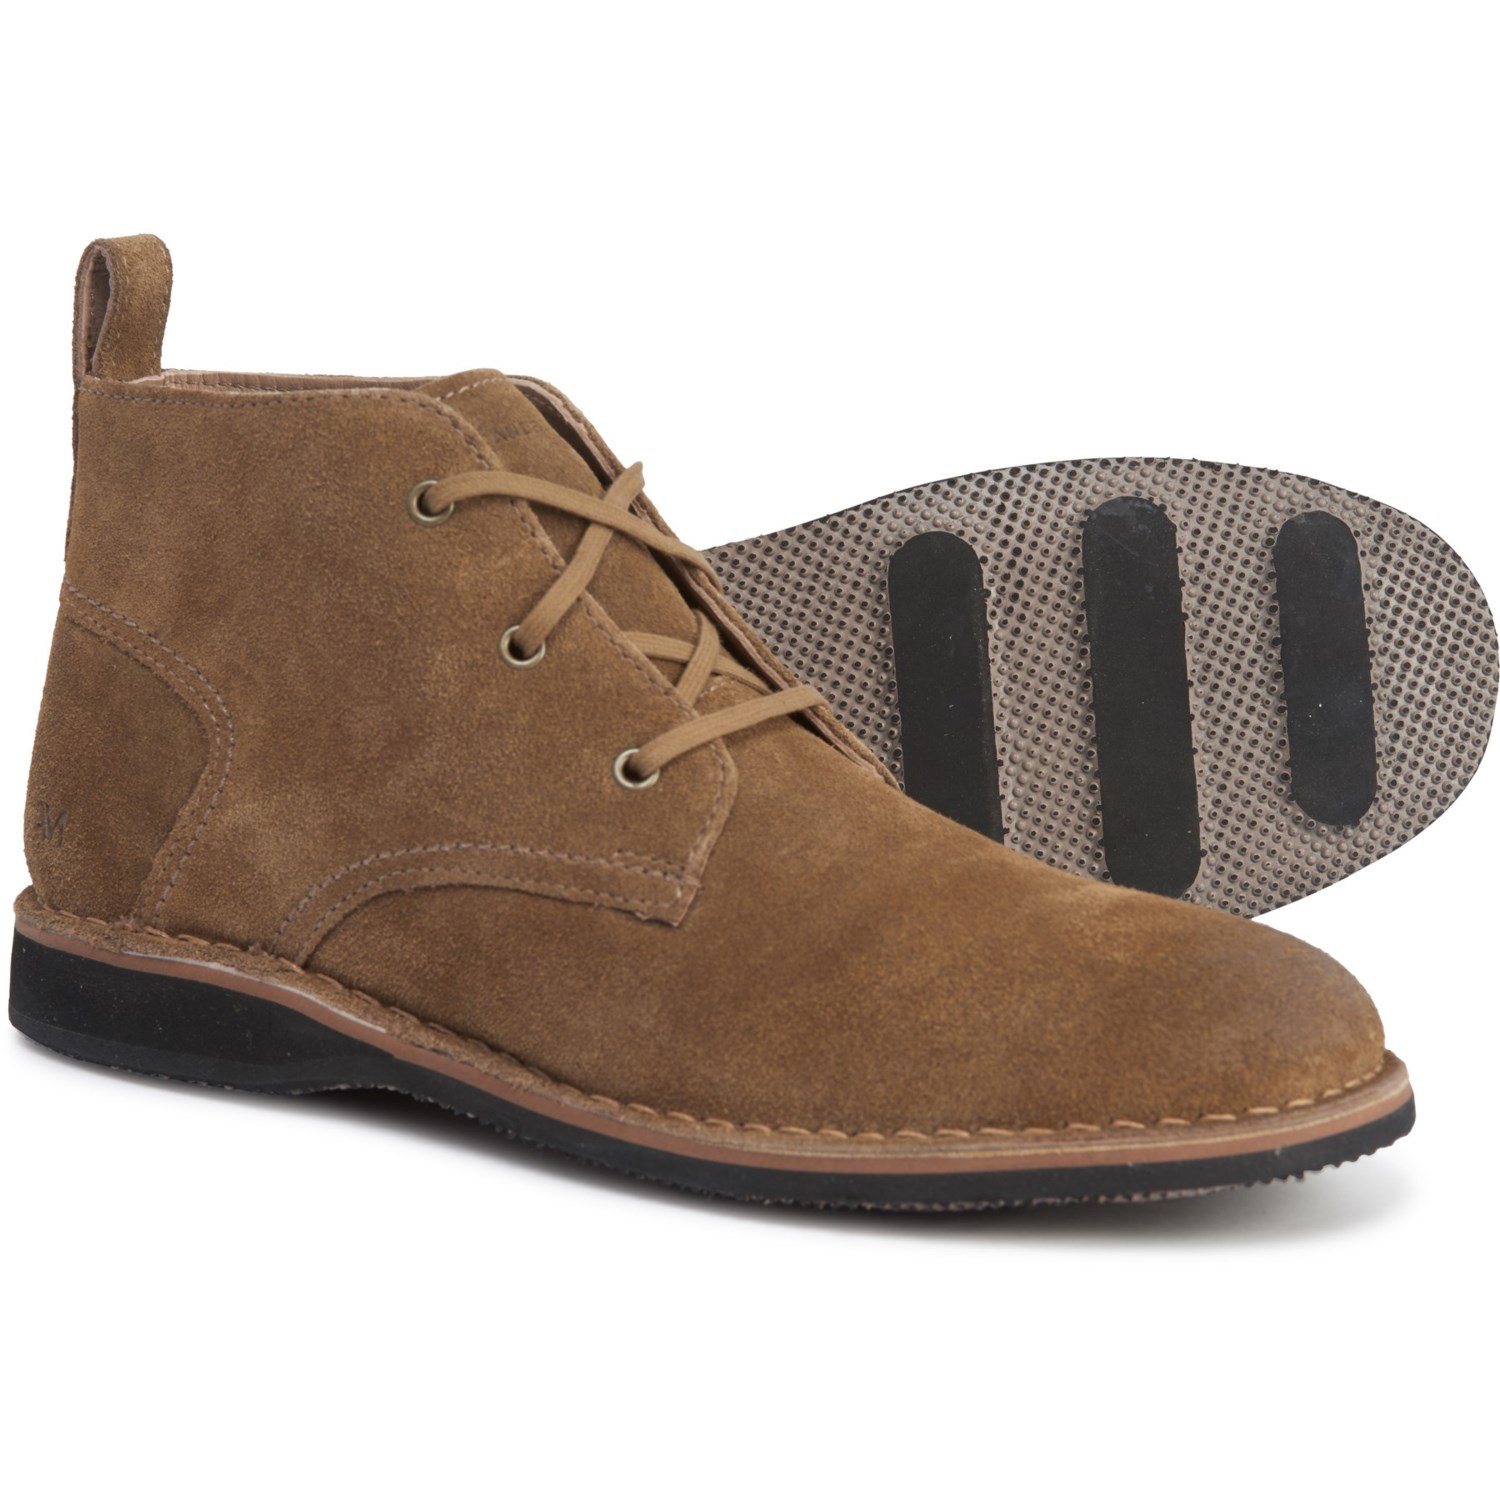 mens suede chukka boots